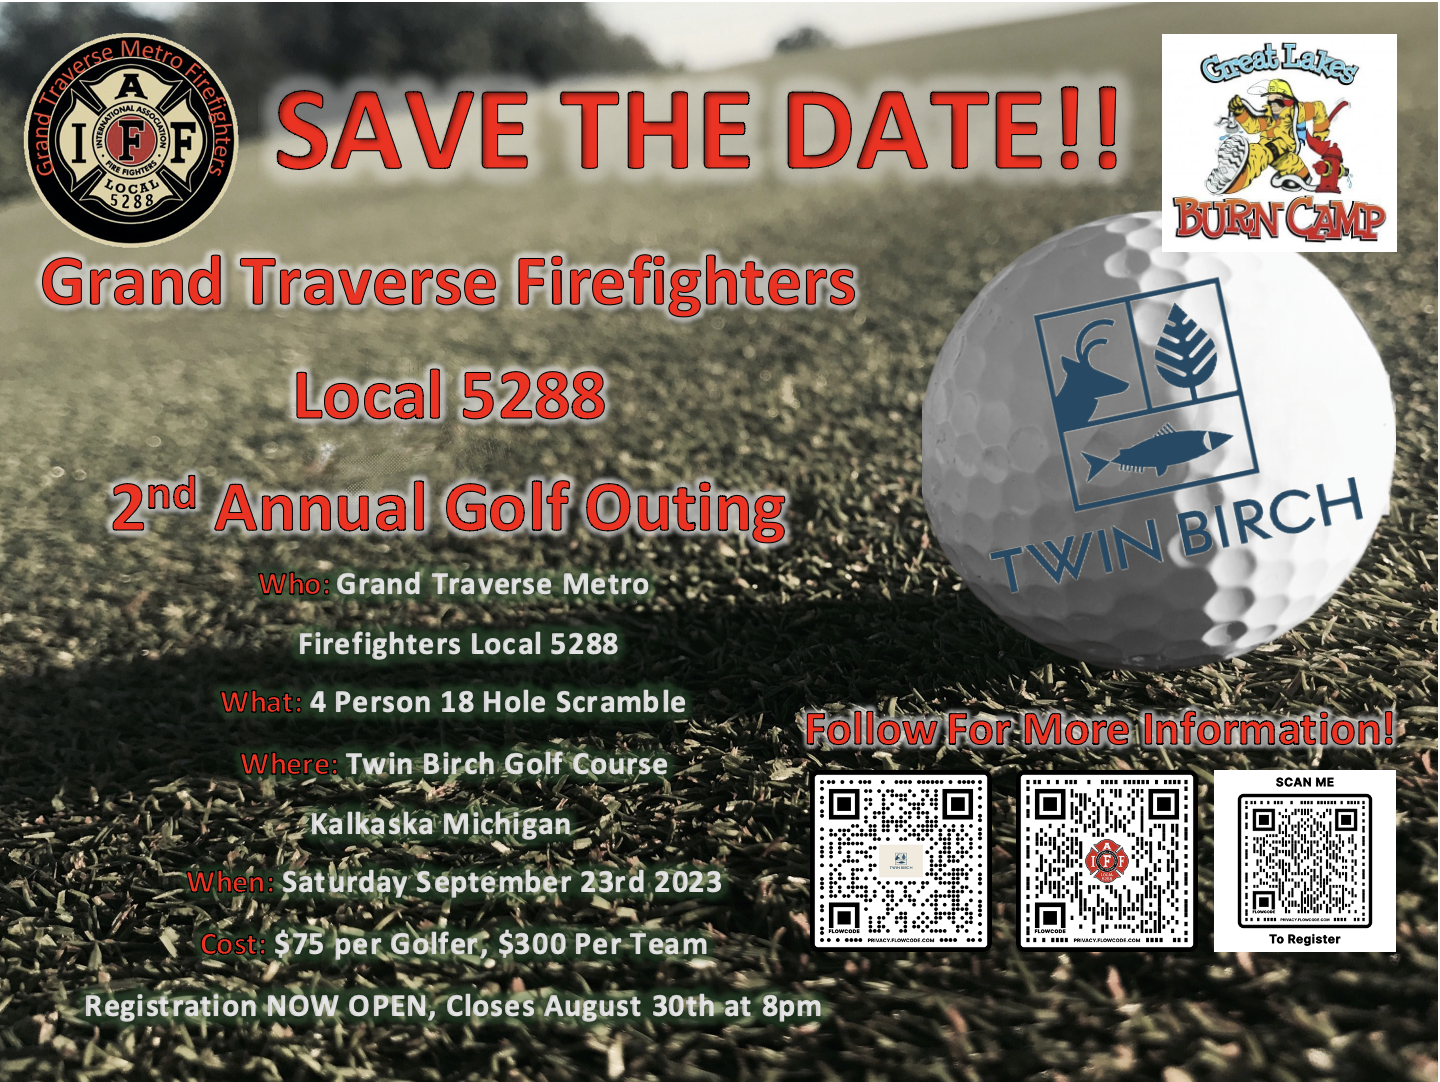 Grand Traverse Metro Firefighters Local 5288